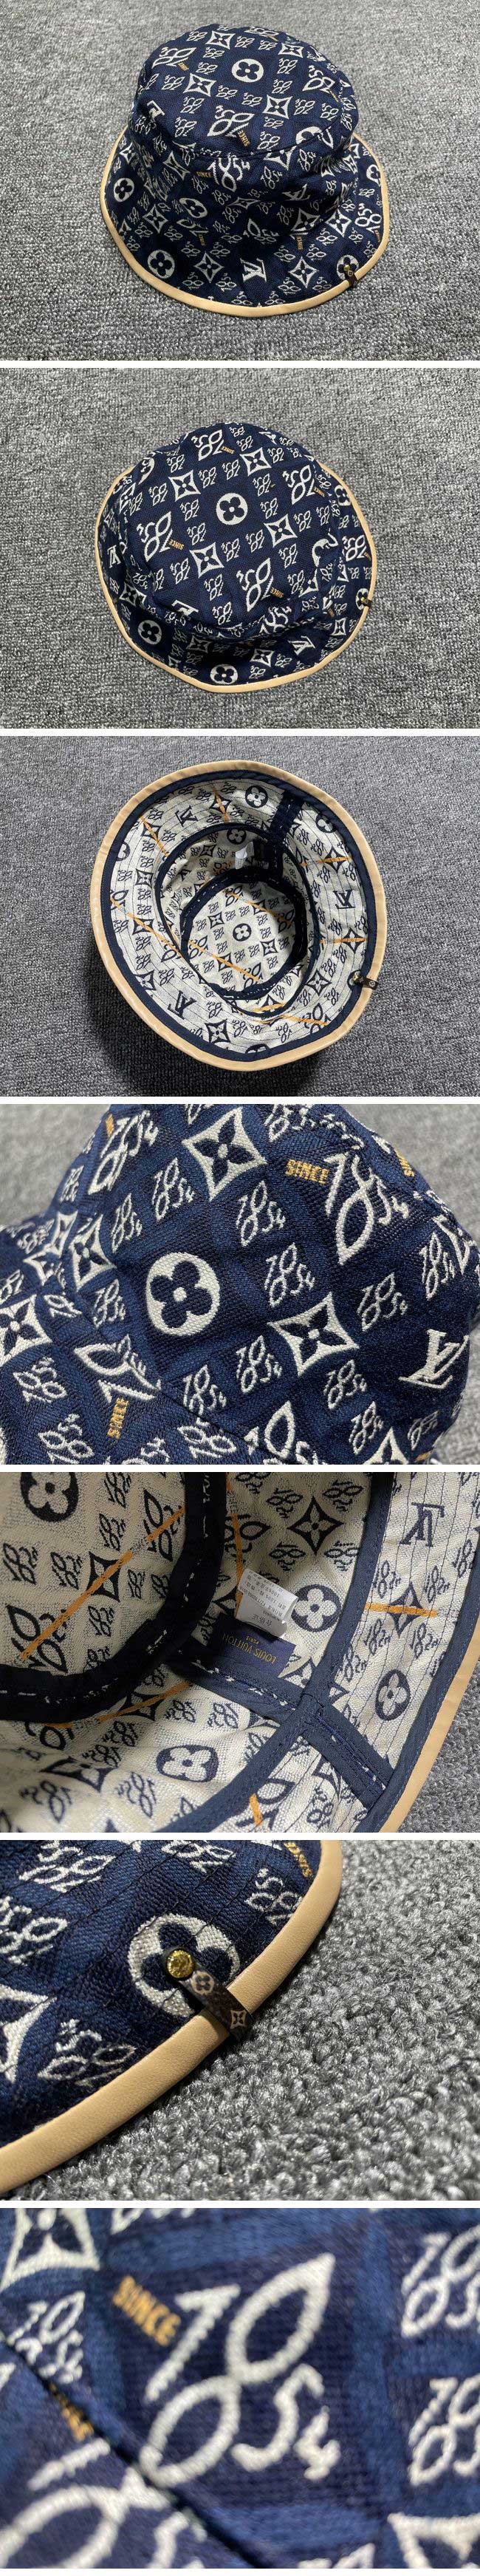 Louis Vuitton Cince1854 Bucket Hat ルイヴィトン シンス1854 バケット ハット M 58cm